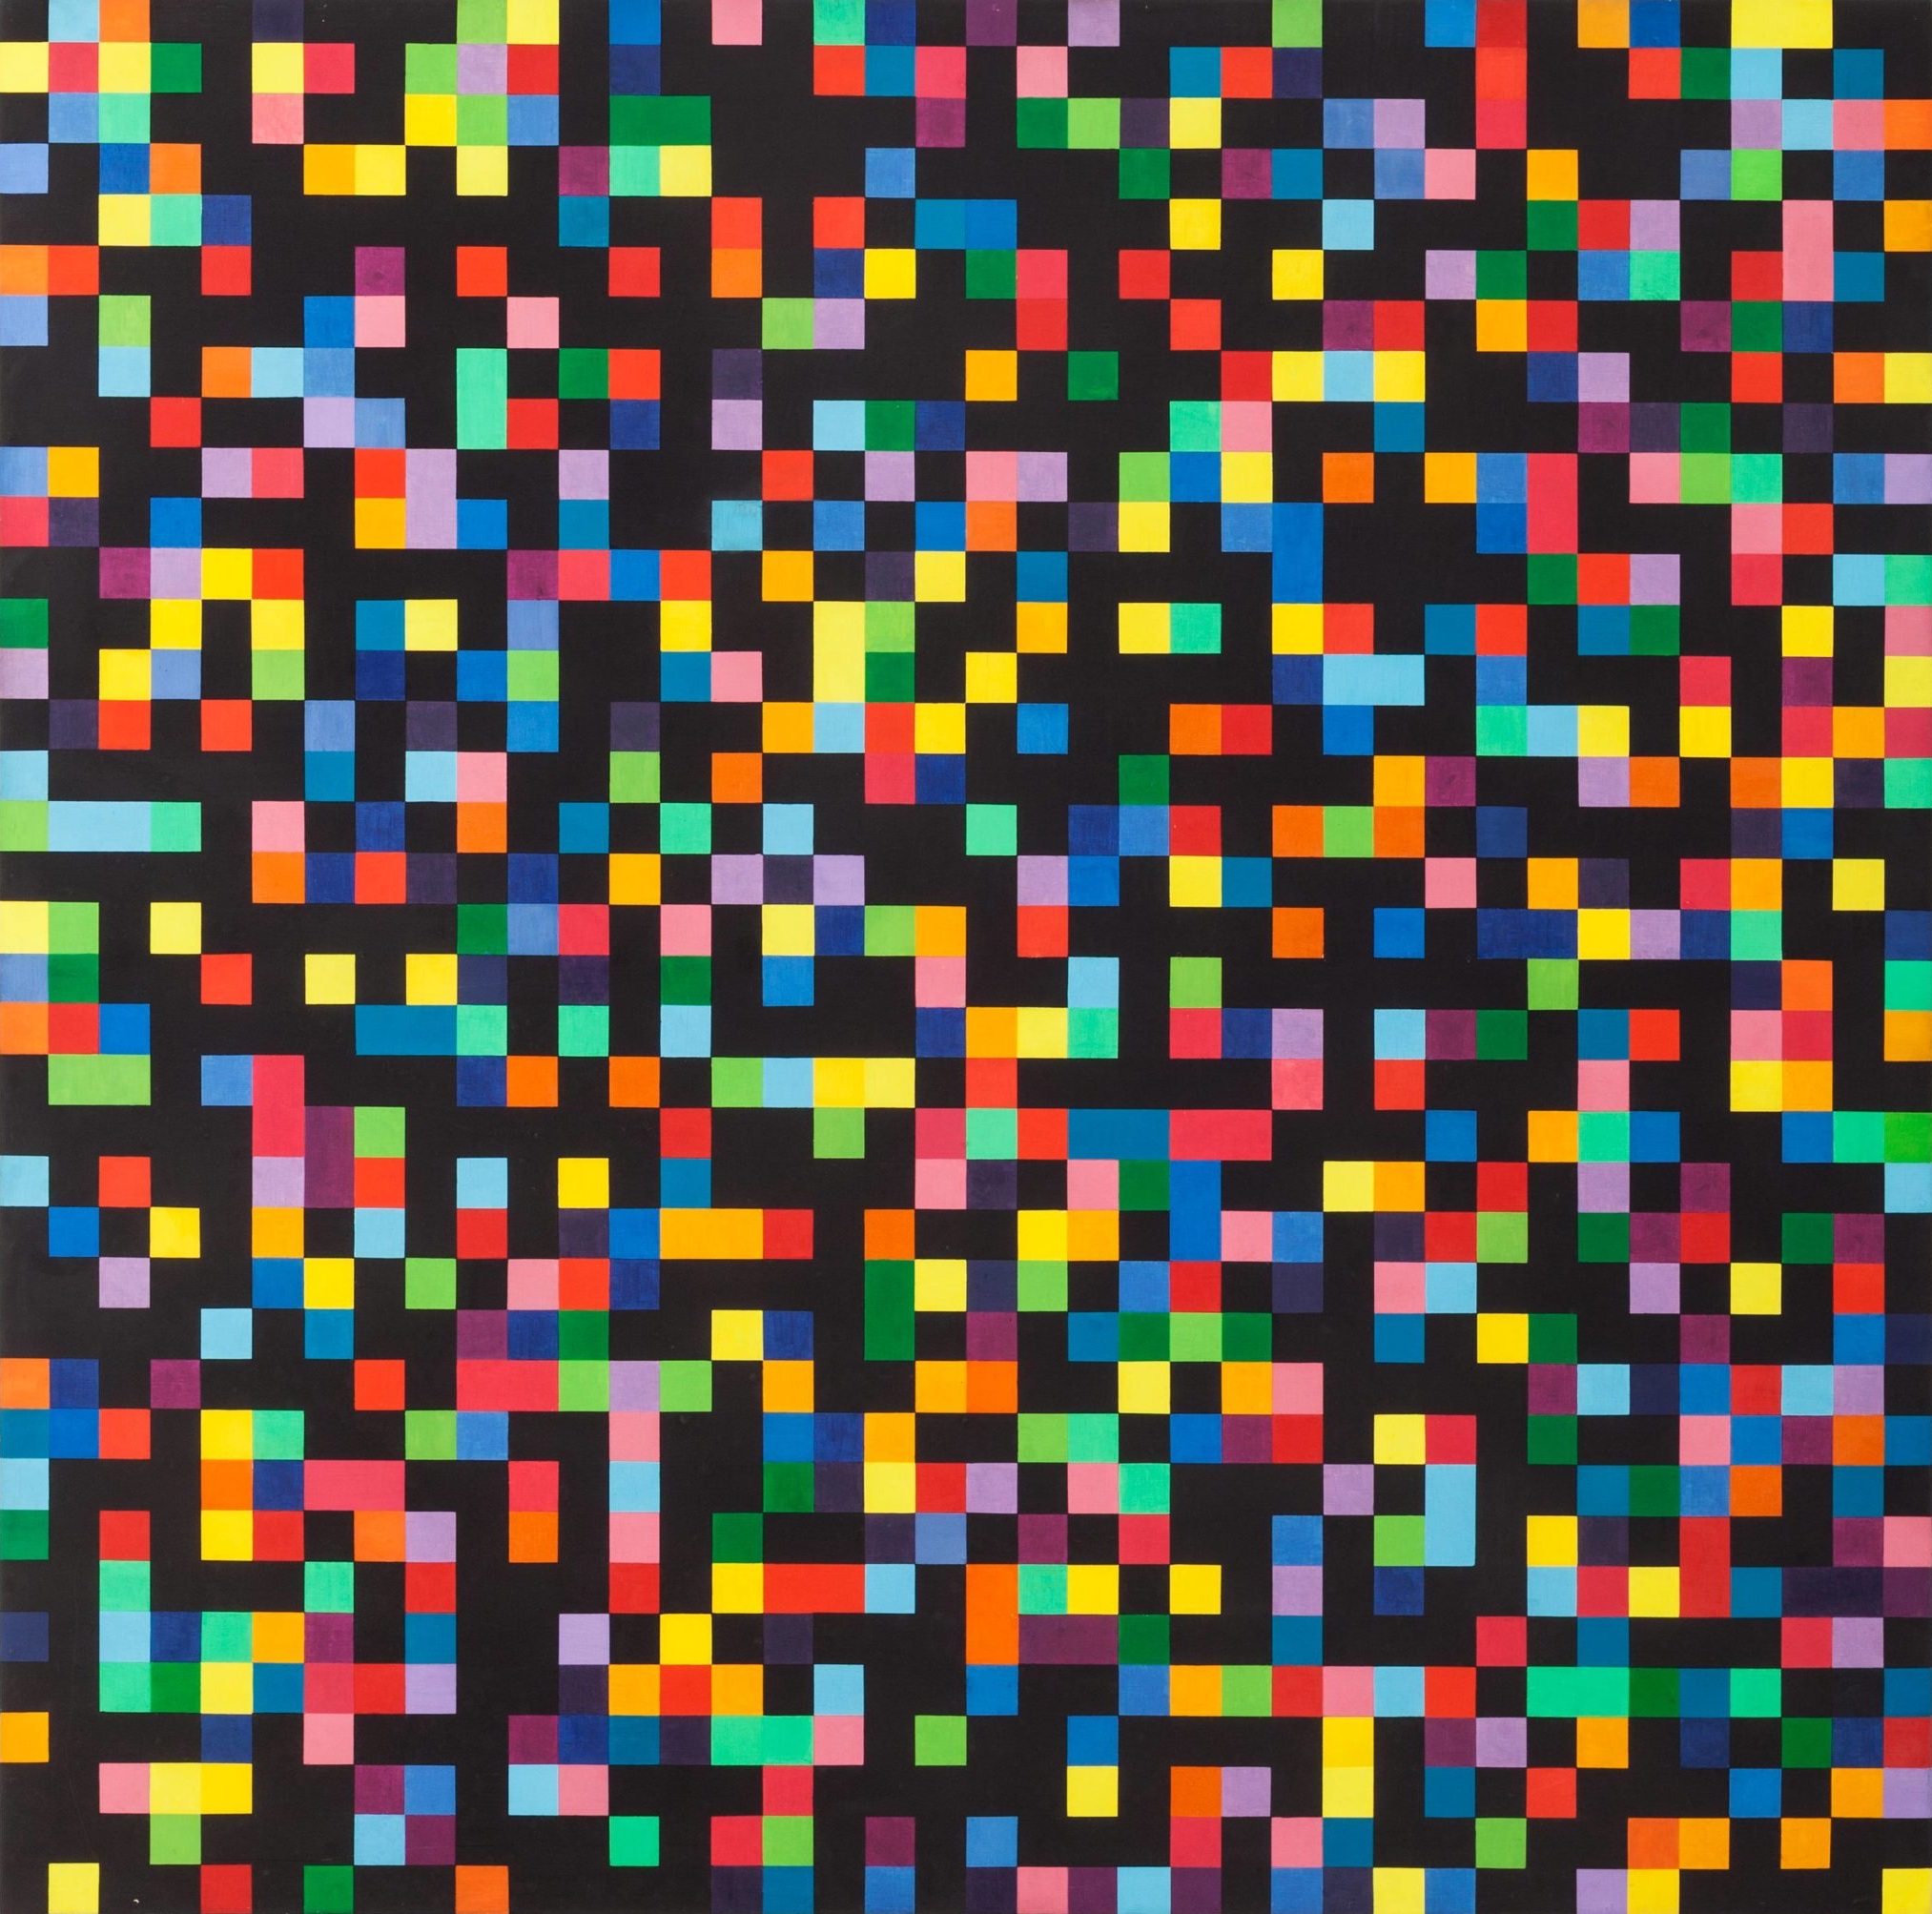 Ellsworth Kelly: Spectrum Color Arranged by Chance (1951–53)